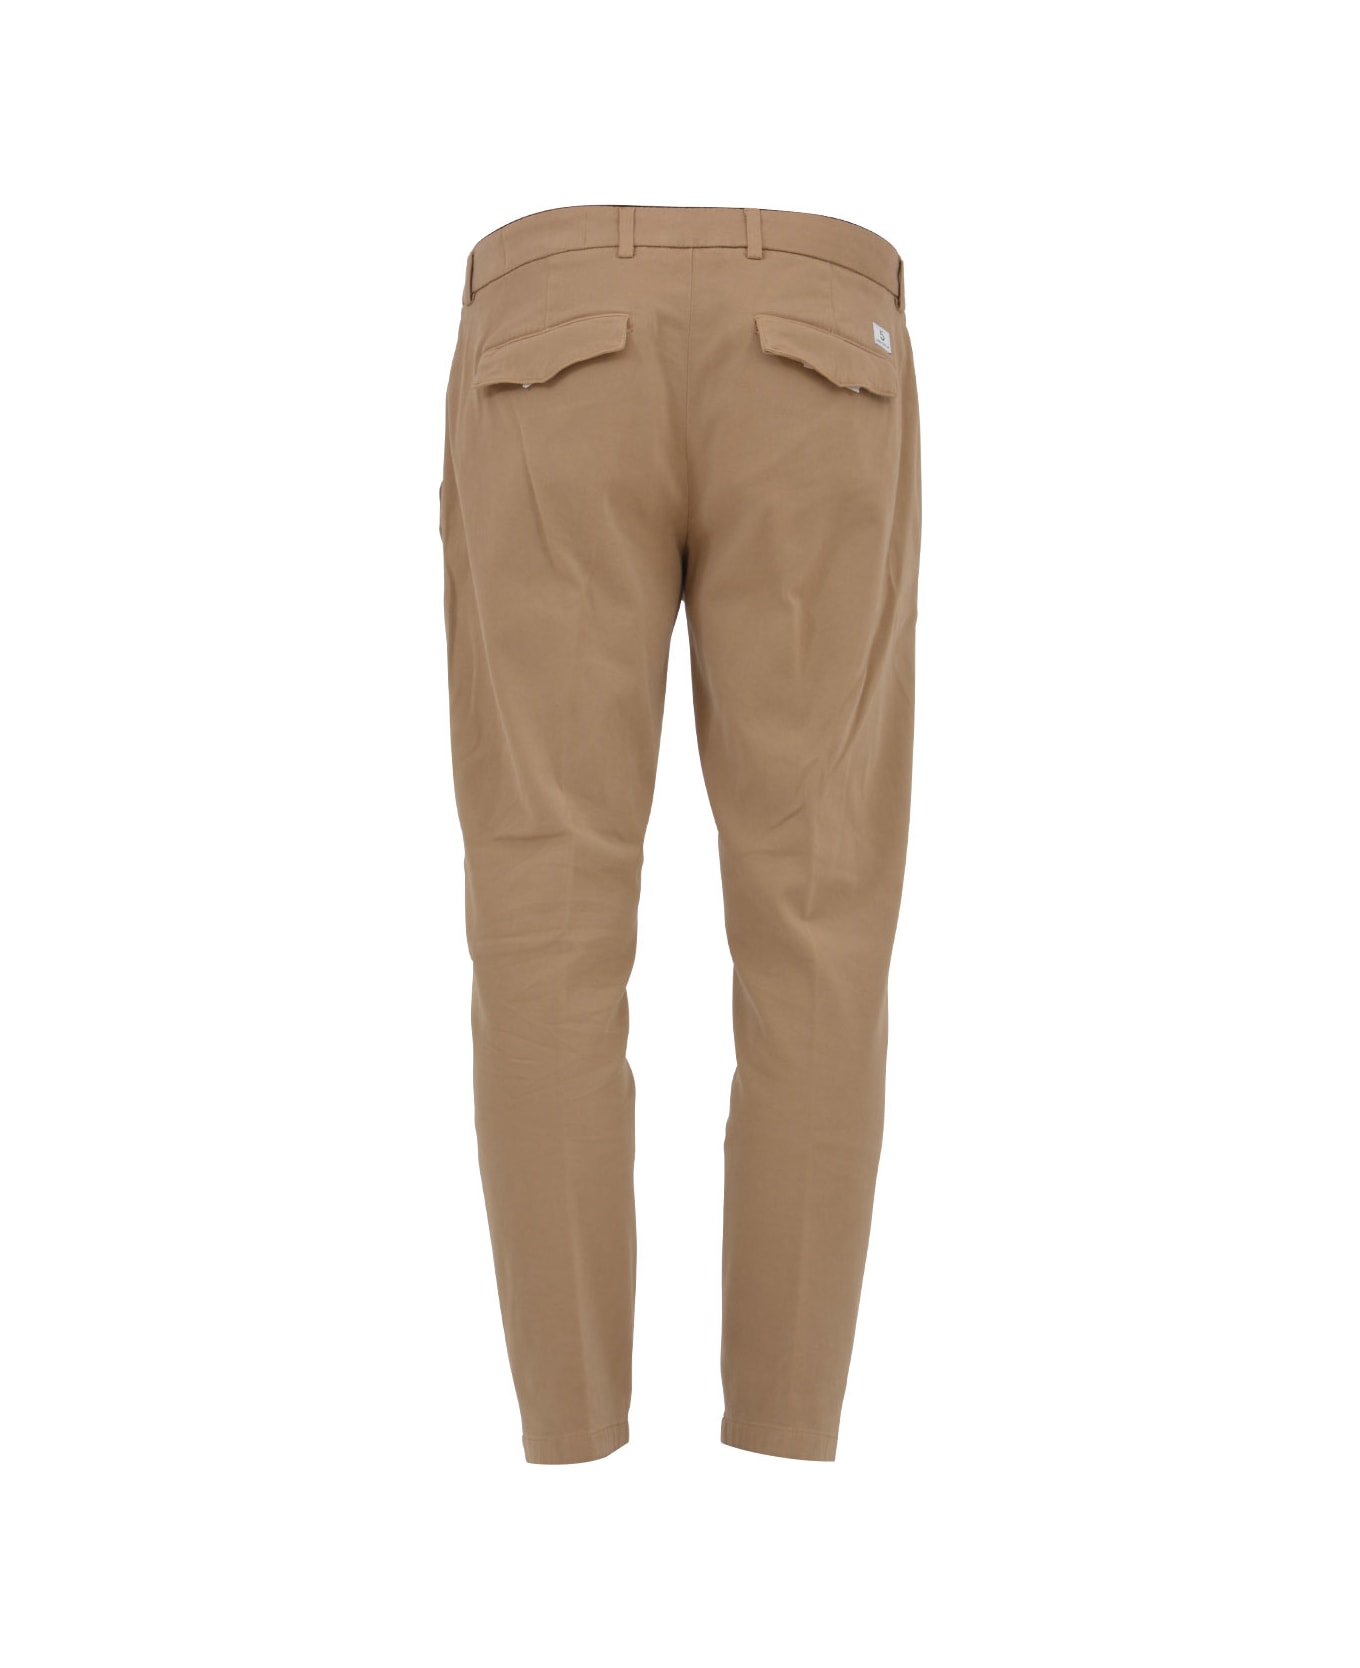 Department Five Chino Trousers - BEIGE